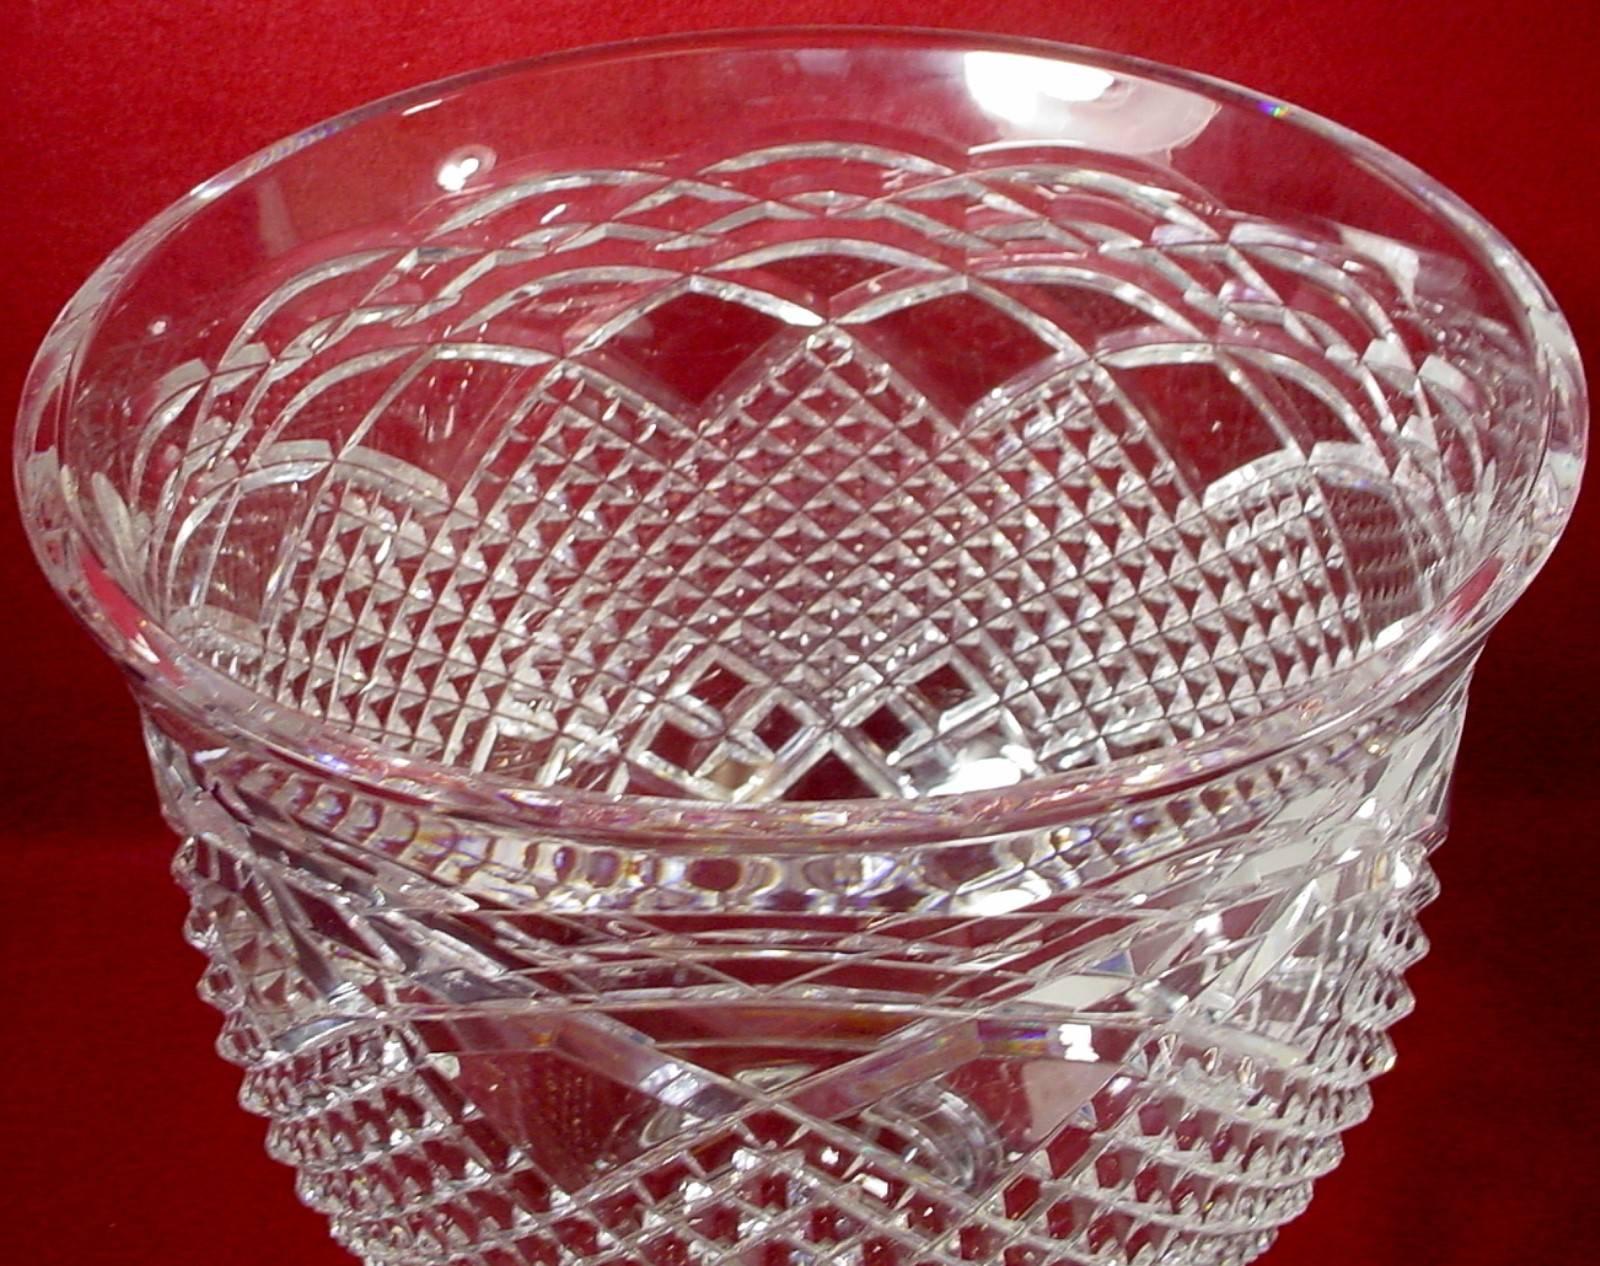 China finders.

China, crystal, flatware and collectible matching service is offering one (1). 

Waterford Crystal Designers Gallery Collection Irish rainbow footed trifle bowl signed by Tom Brennan.

In great condition free from chips,